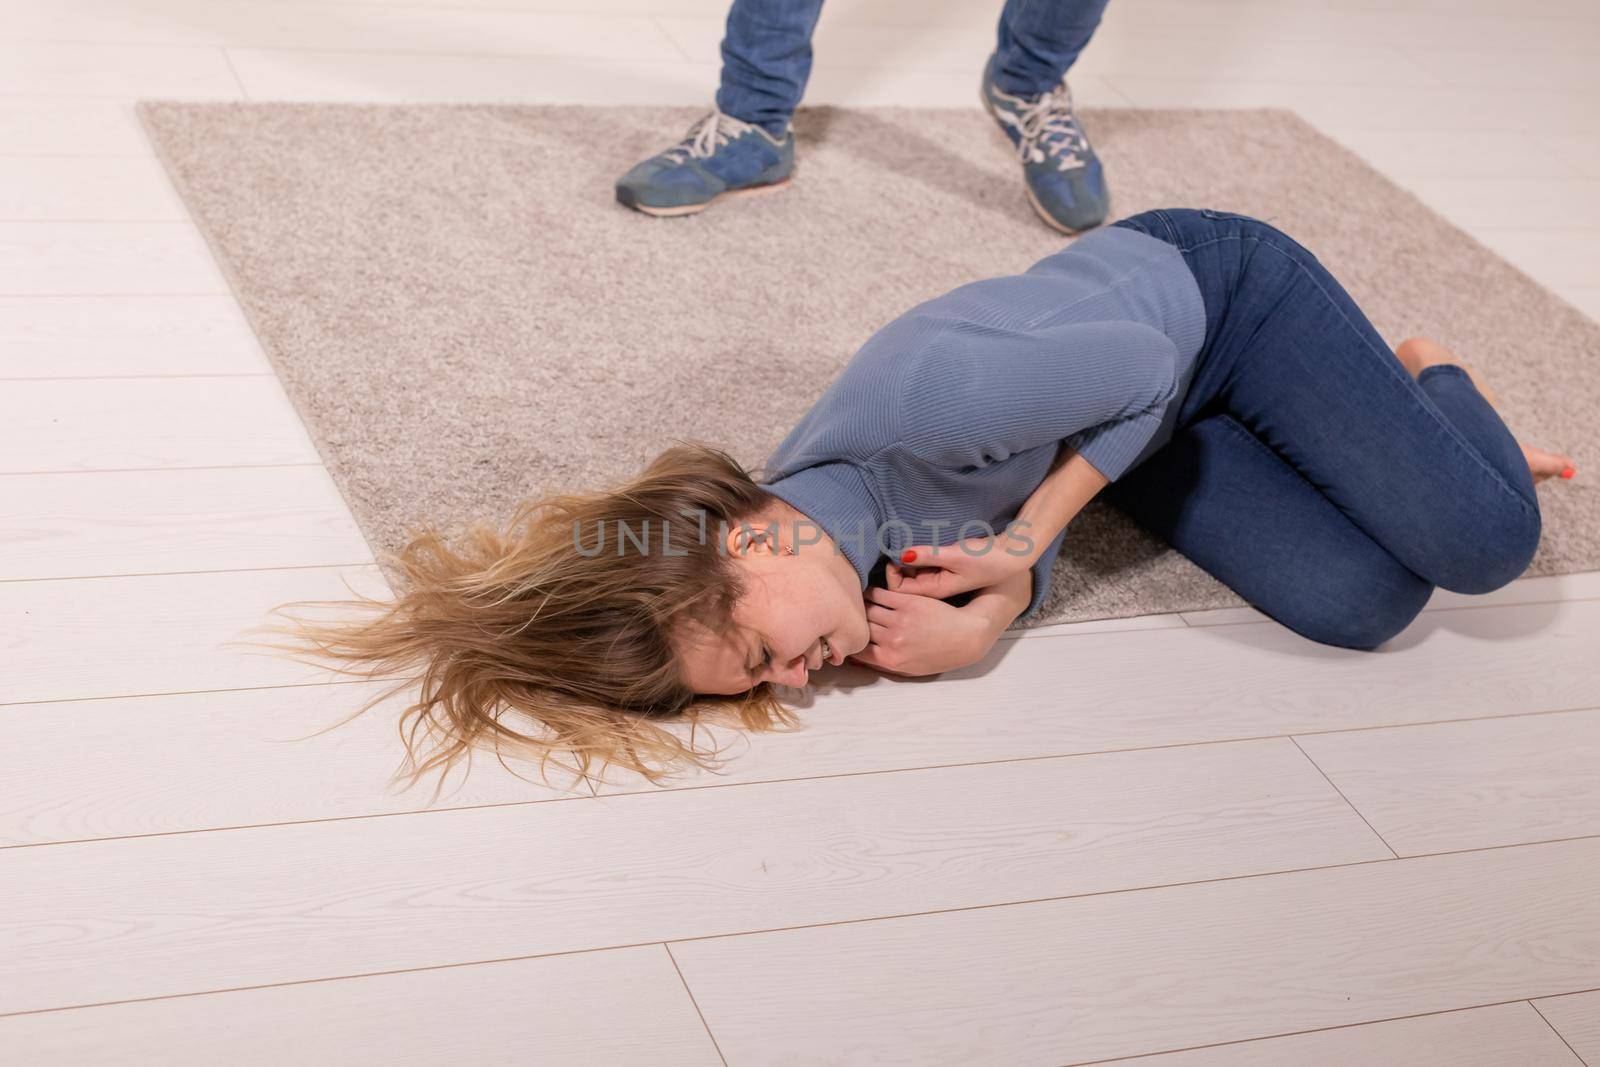 people, abuse and violence concept - woman threatened by husband lying on floor.